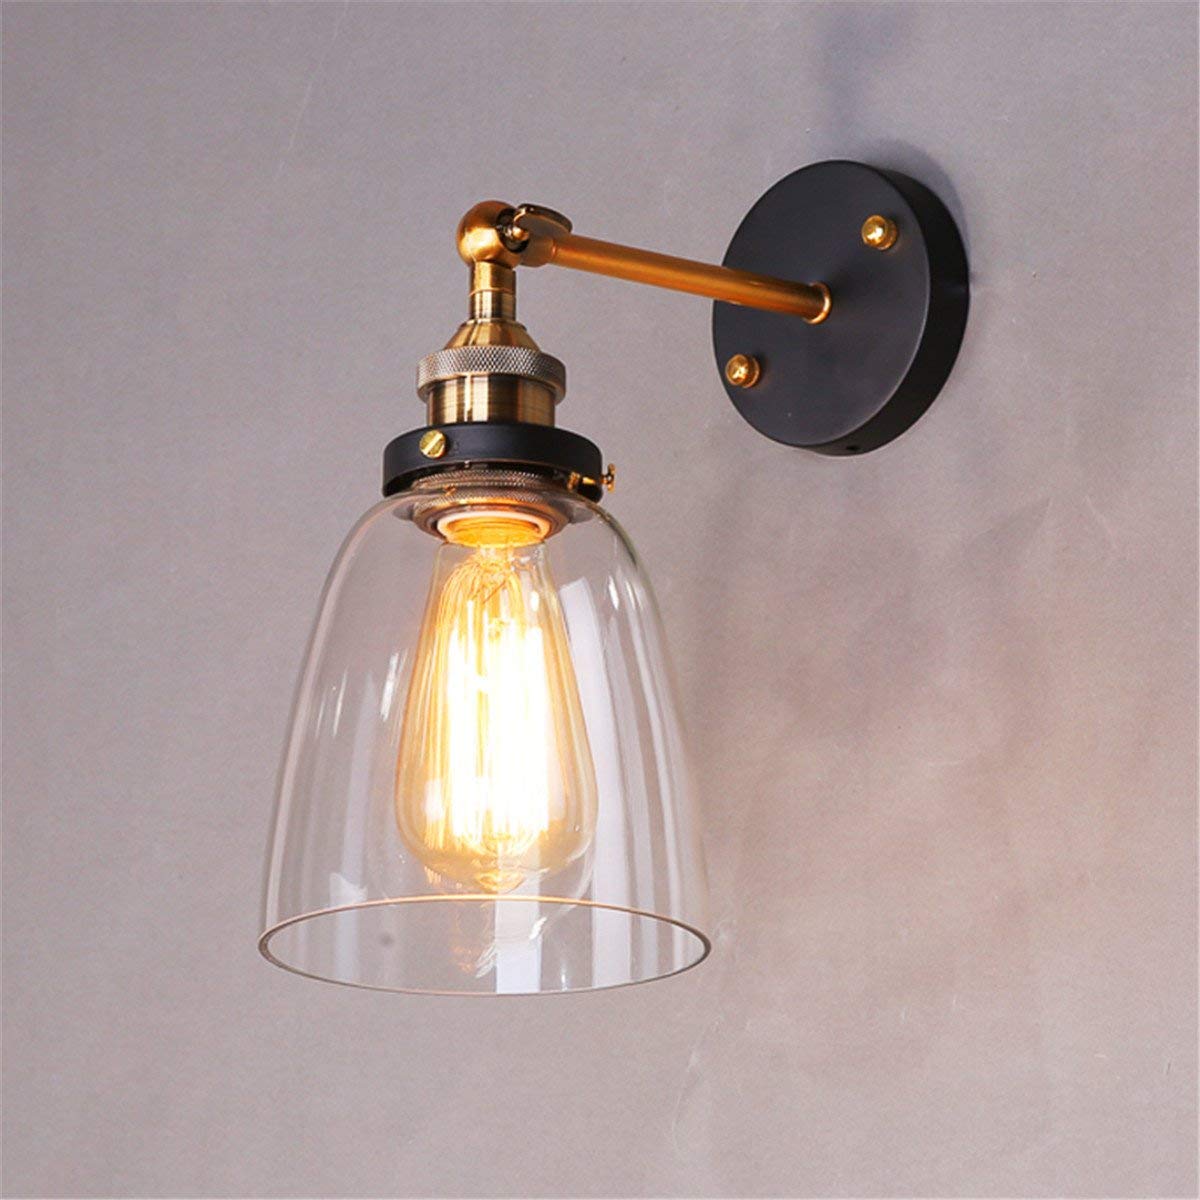 Lampop Industrial Vintage Glass Wall Light Wall Lamp Edison Sconce Adjustable Metal Retro Wall Lighting for Loft Coffee Bar Living Room Dining Room Base E27（Without Bulb) [Energy Class A+++]